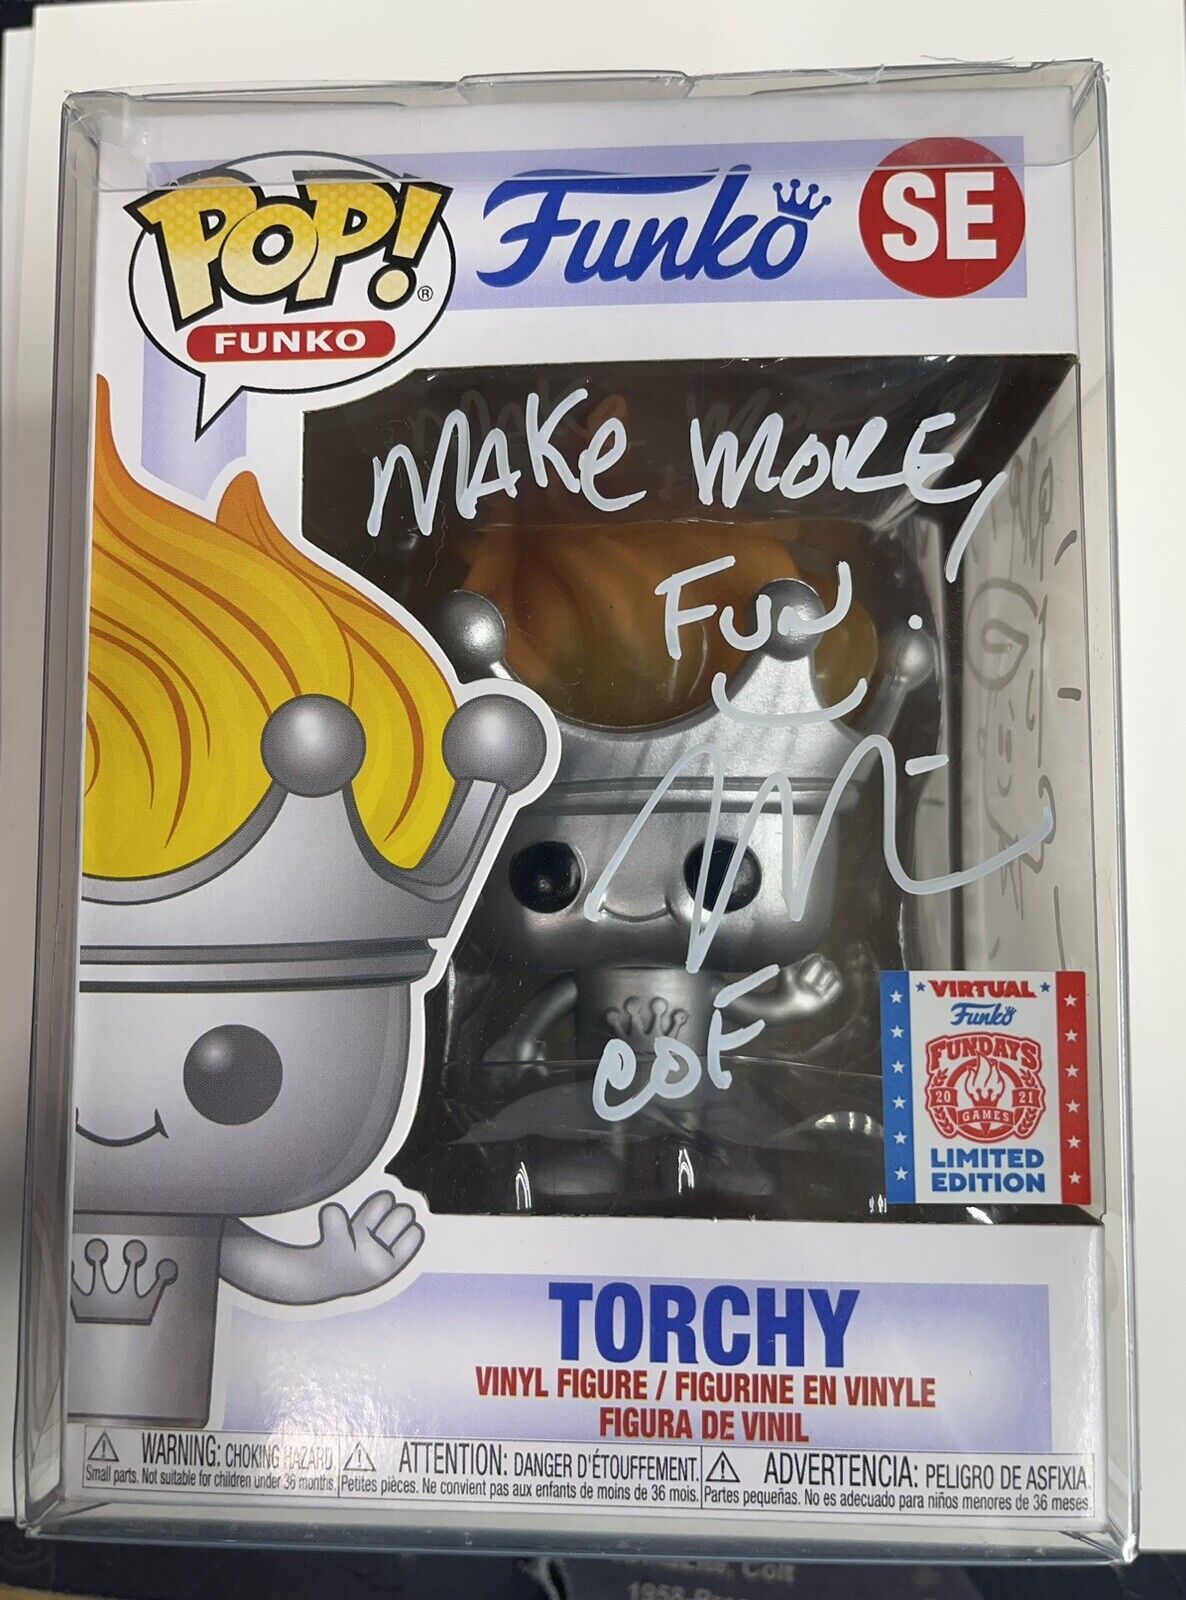 Mike Becker Signed Torchy Funko Pop Limited Edition w/ Quote and Remark